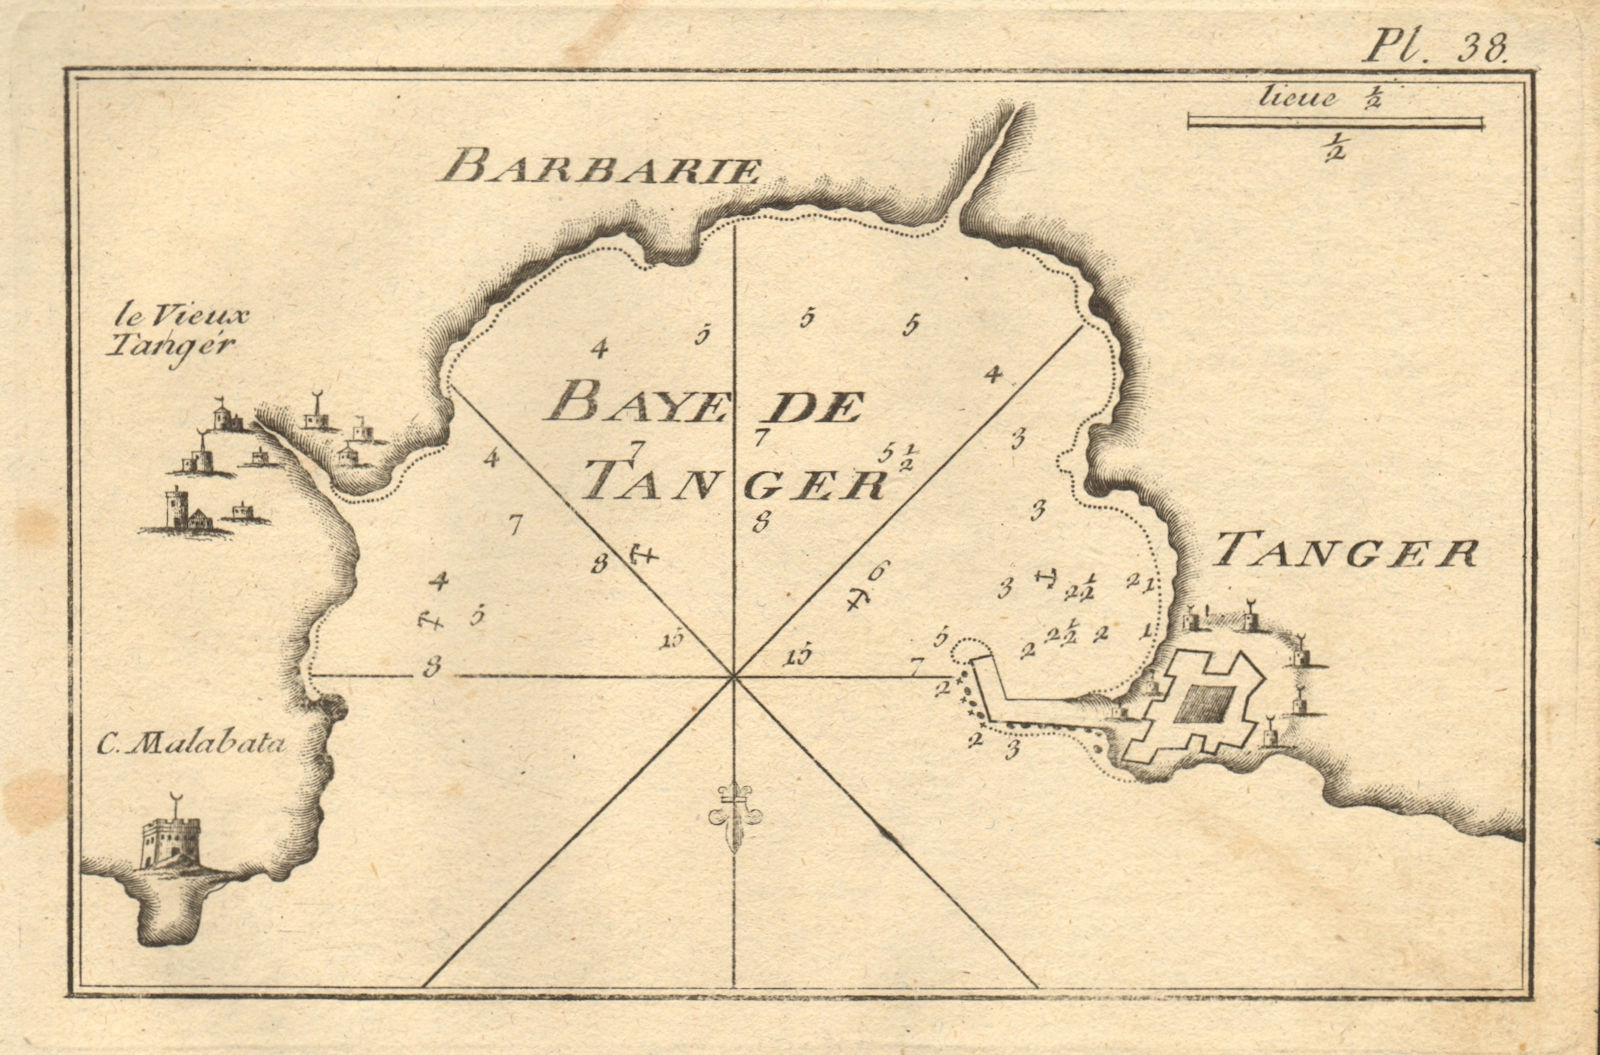 Baye de Tanger (Barbarie). Plan of the Bay of Tangiers, Morocco. ROUX 1804 map